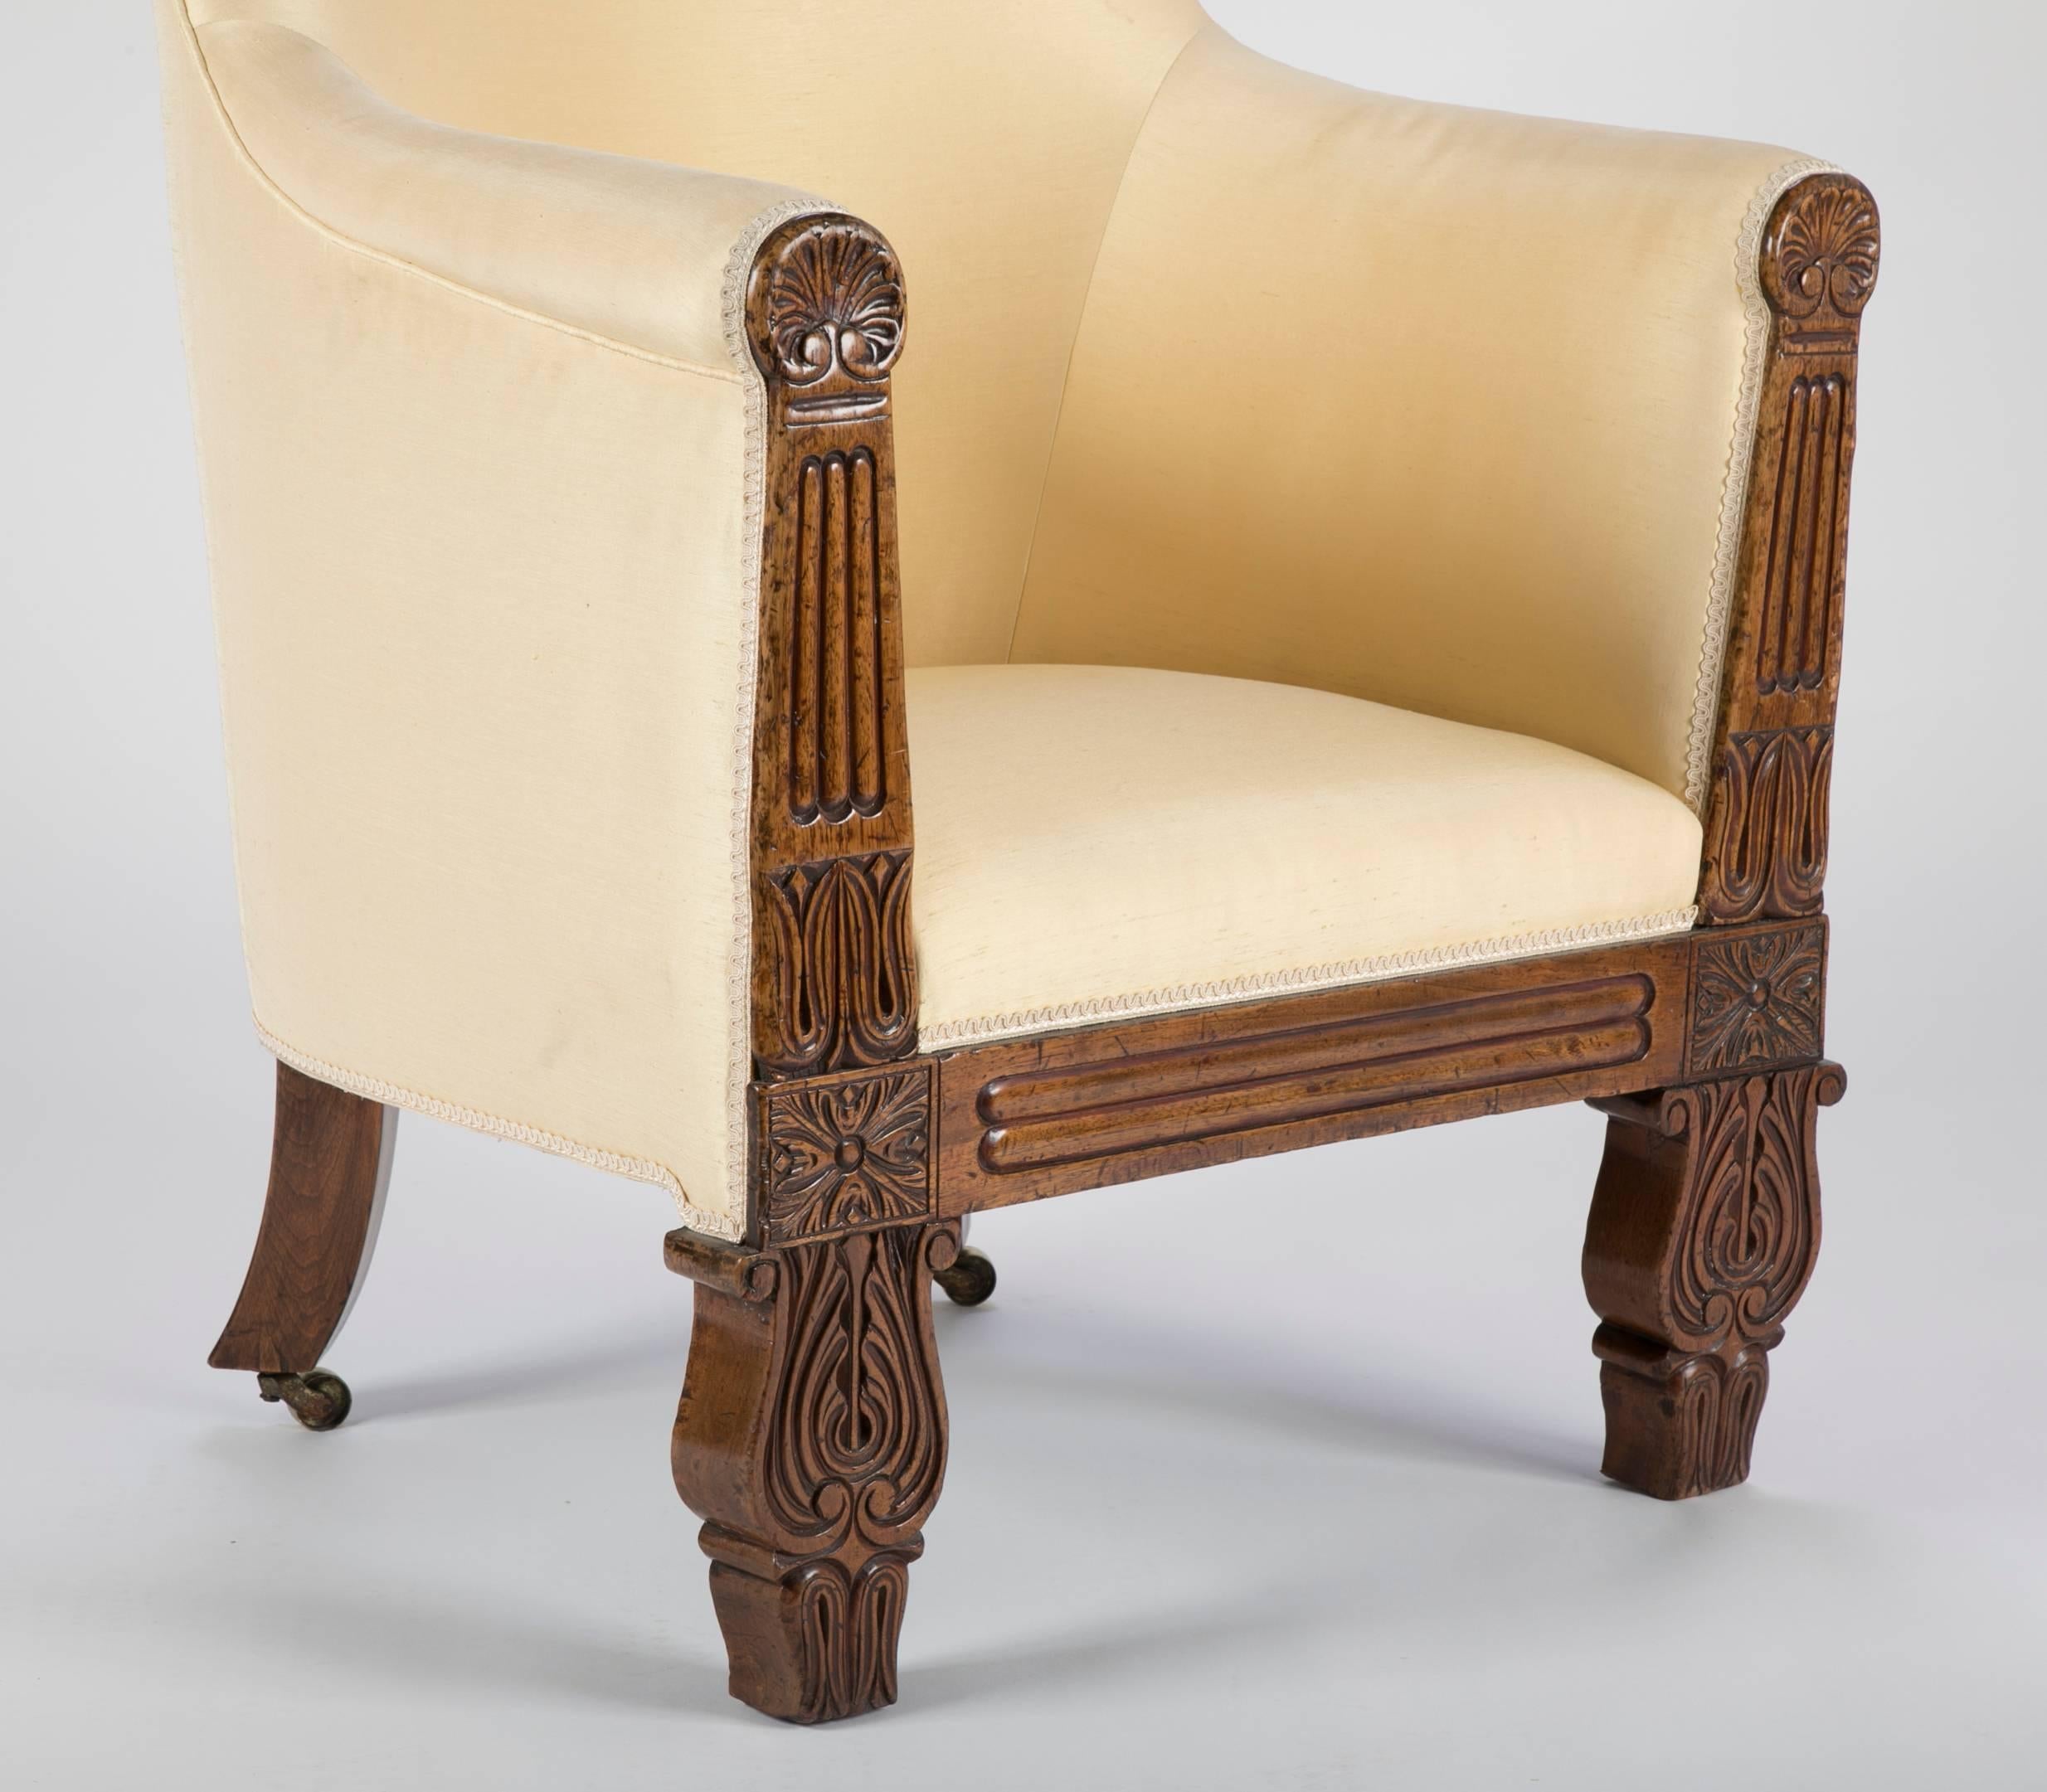 An early 19th century Irish Regency carved and upholstered walnut armchair.